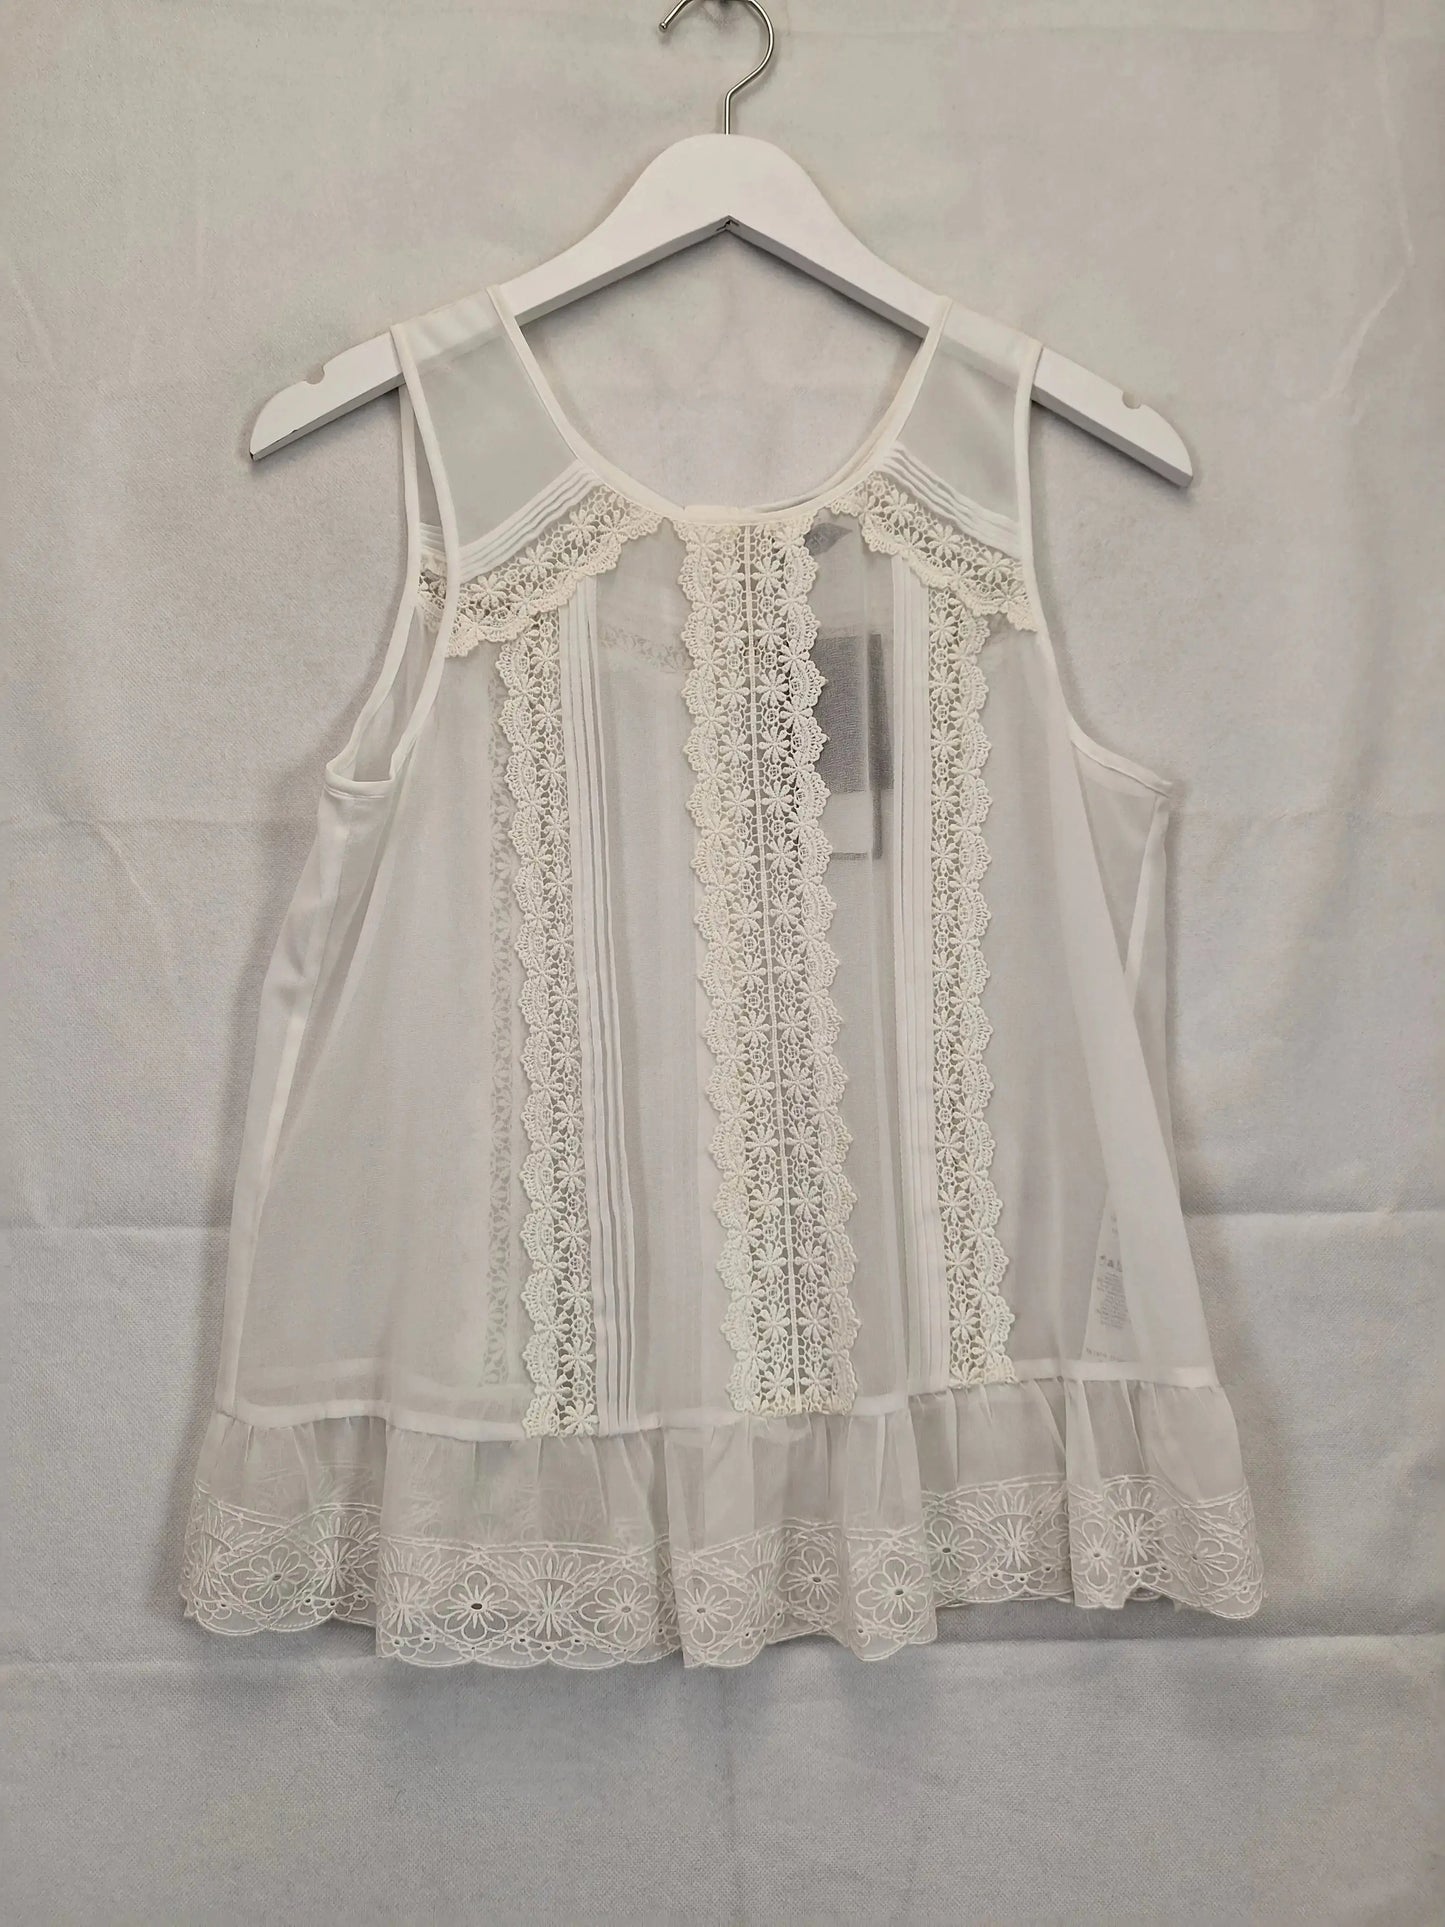 Forever New Boho Sheer Lace Pleated Top Size 12